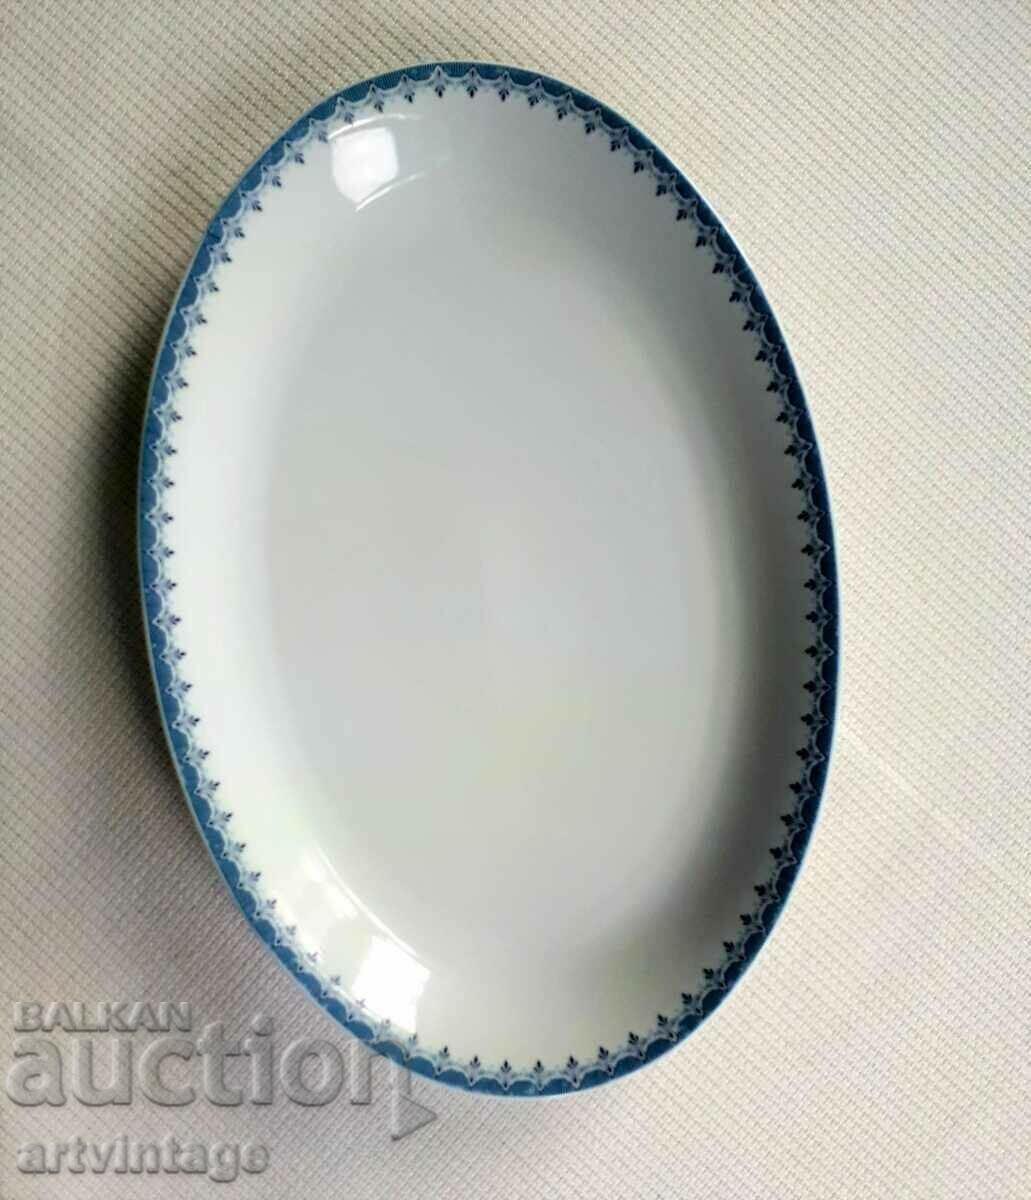 Oval plate with blue edging